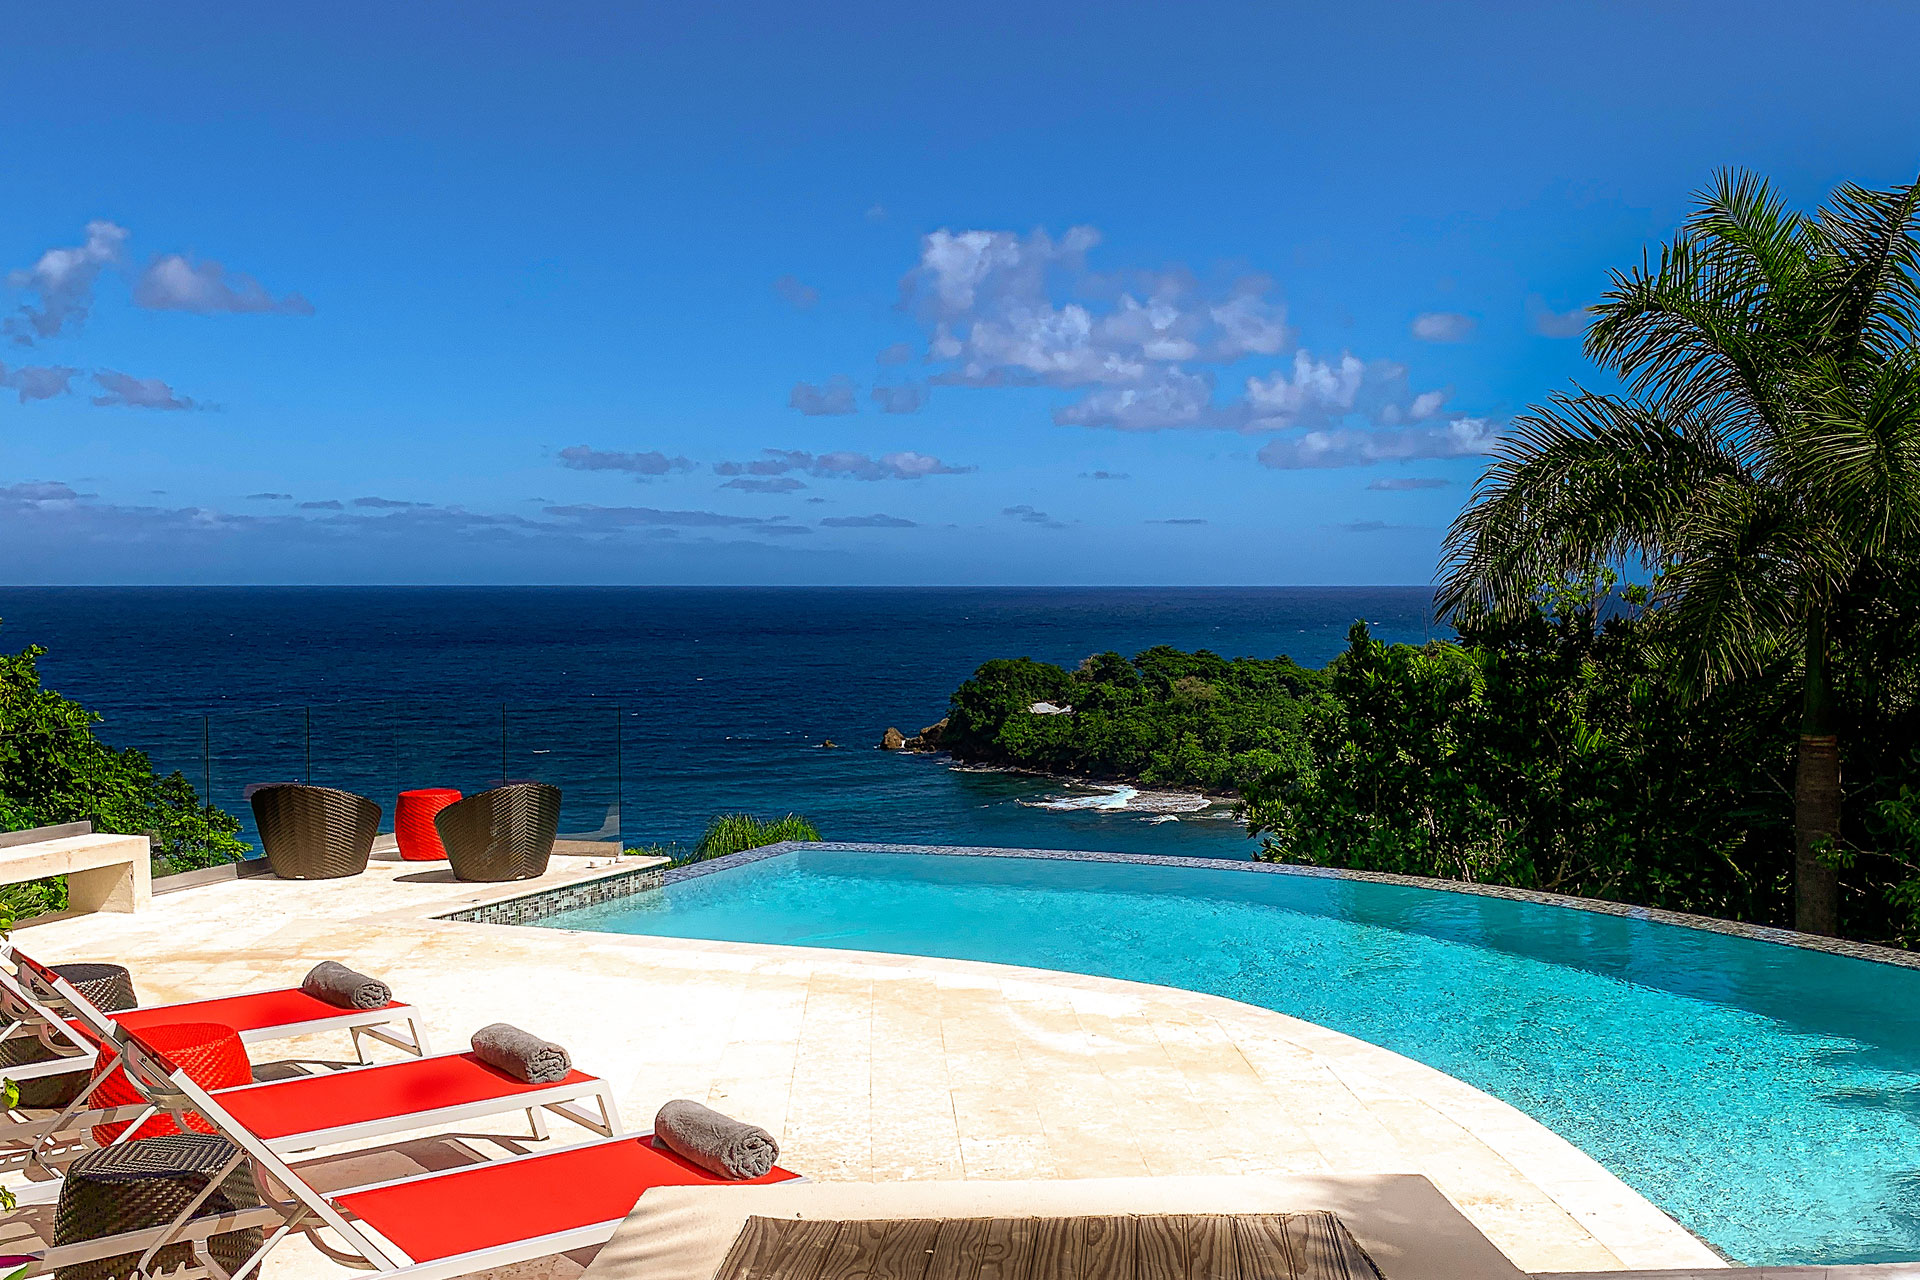 Infinity pool with red sun loungers and a view of the ocean.